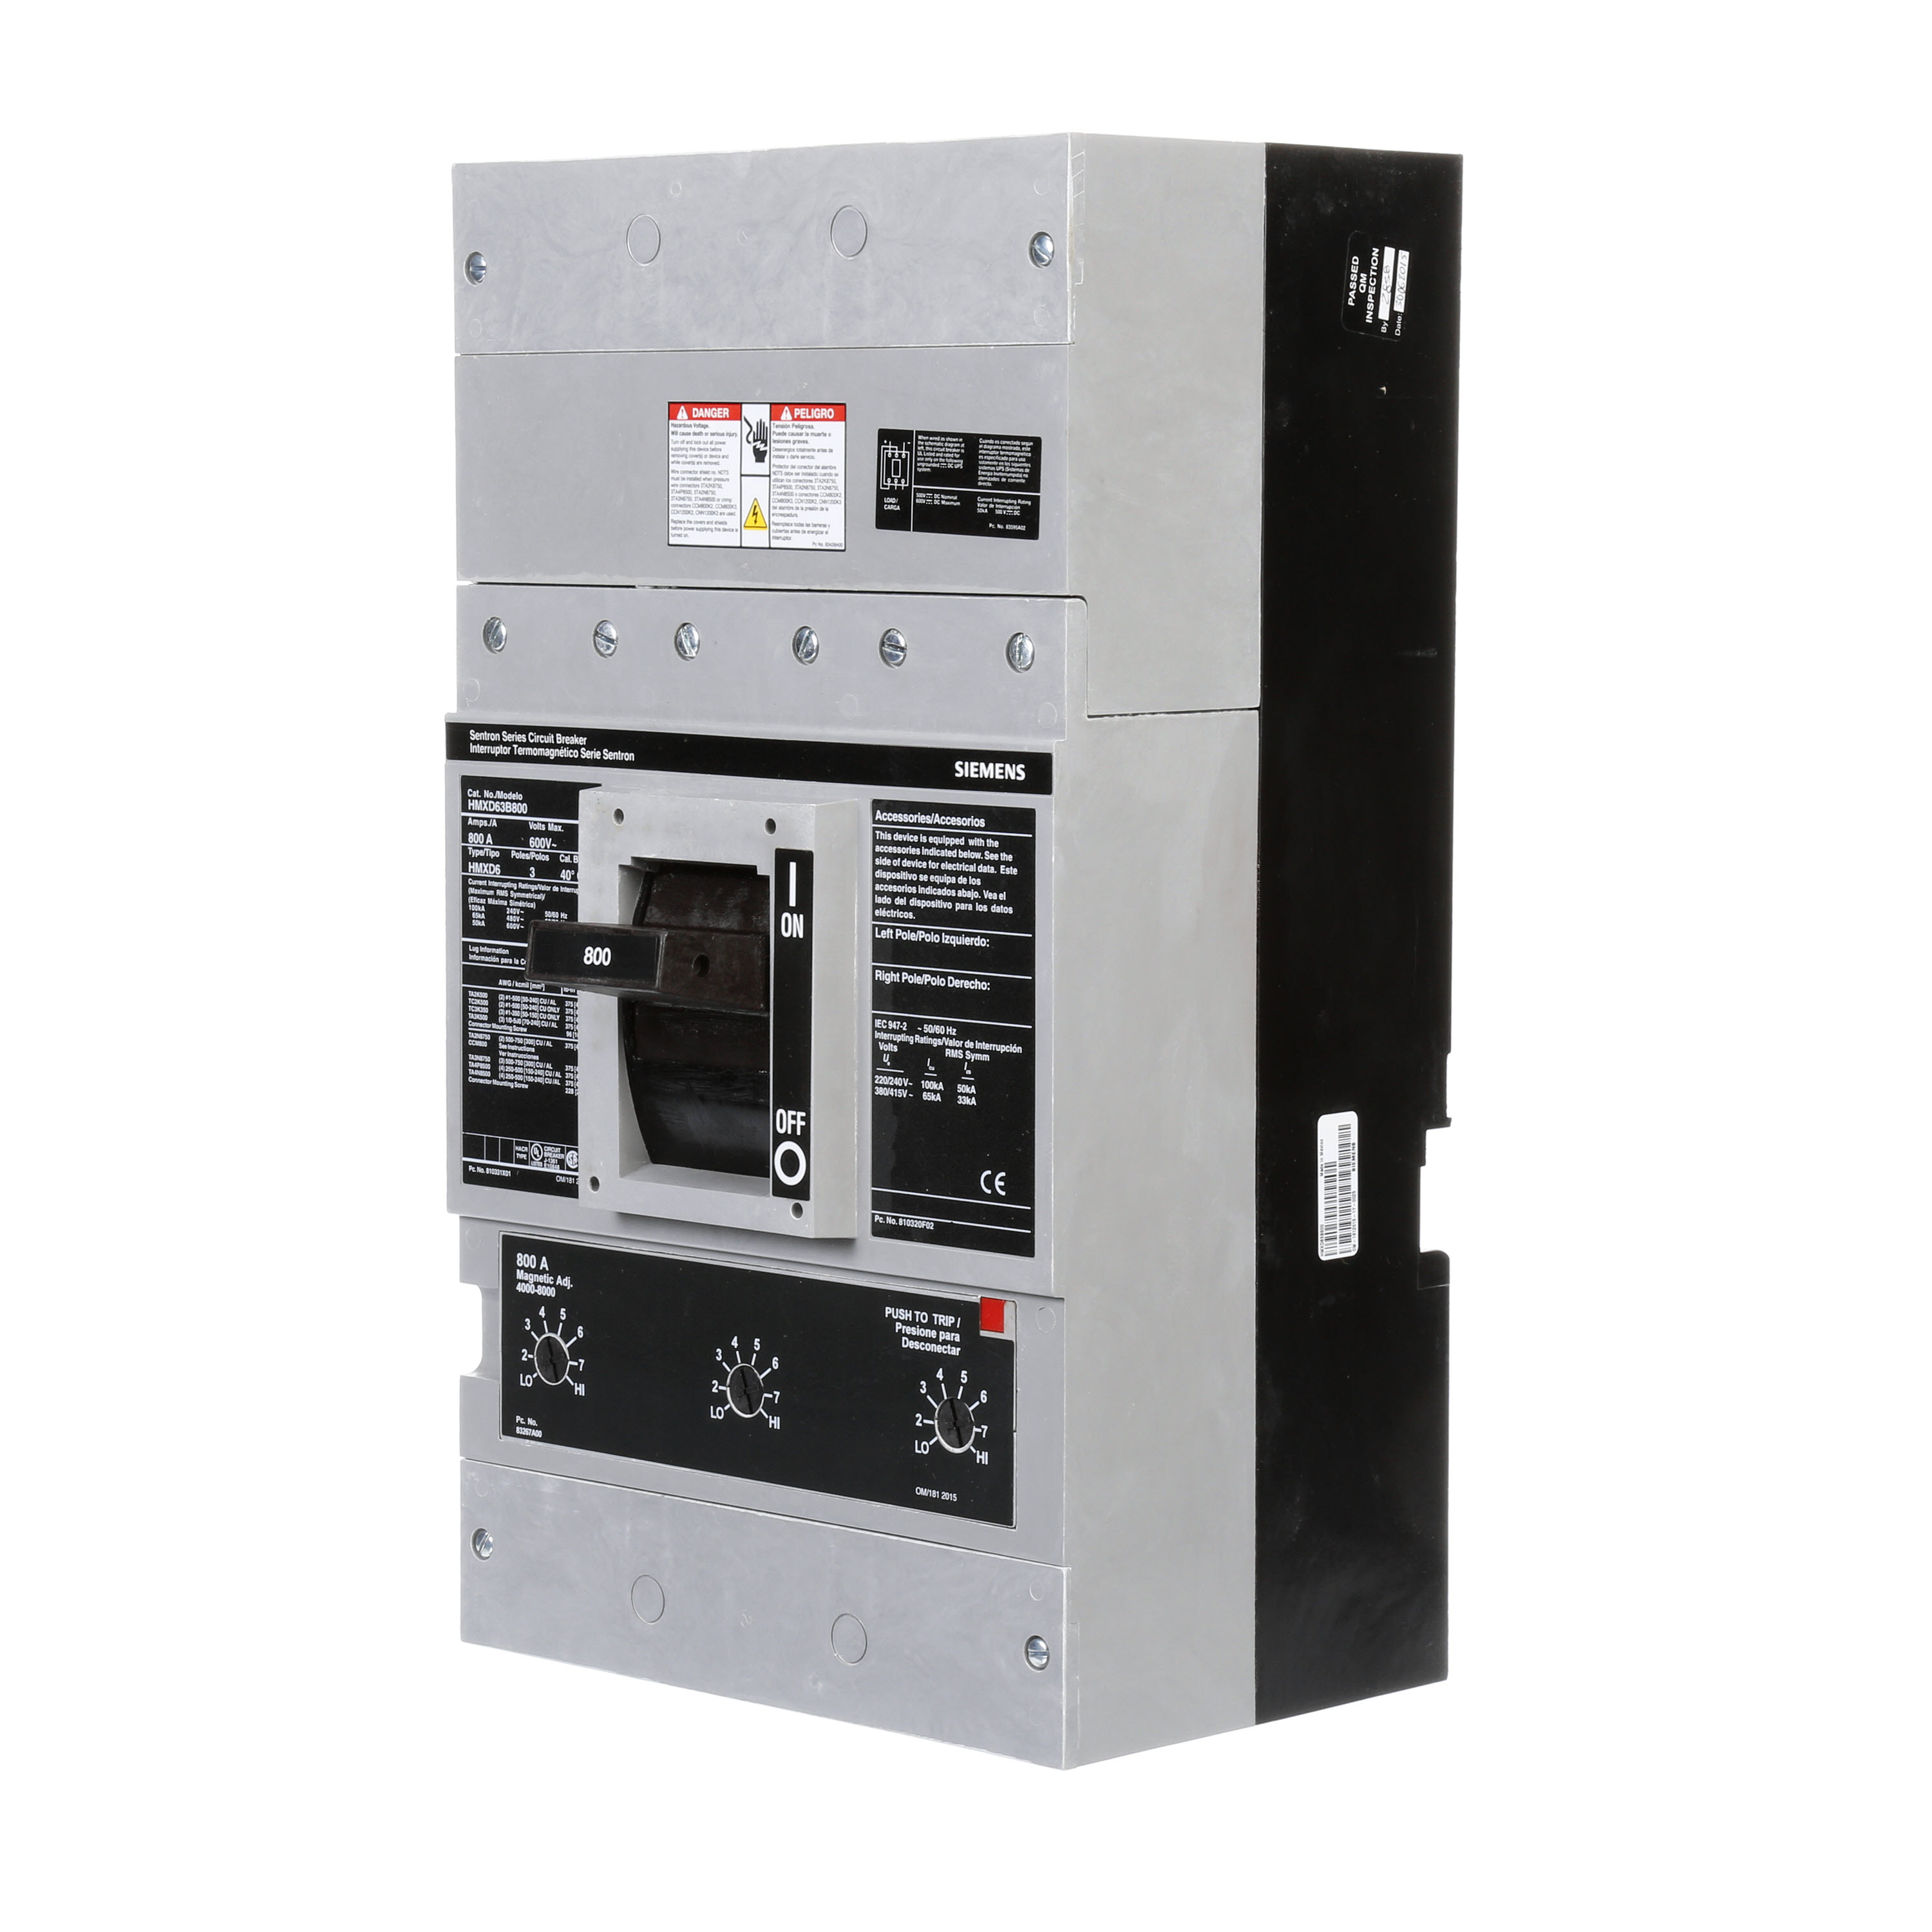 SIEMENS LOW VOLTAGE SENTRON MOLDED CASE CIRCUIT BREAKER WITH THERMAL - MAGNETICTRIP UNIT. ASSEMBLED STANDARD 40 DEG C BREAKER MD FRAME WITH HIGH BREAKING CAPACITY. 800A 3-POLE (50KAIC AT 600V) (65KAIC AT 480V). NON-INTERCHANGEABLE TRIP UNIT. SPECIAL FEATURES NO LUGS INSTALLED. DIMENSIONS (W x H x D) IN 9.00 x 16.0 x 6.00.